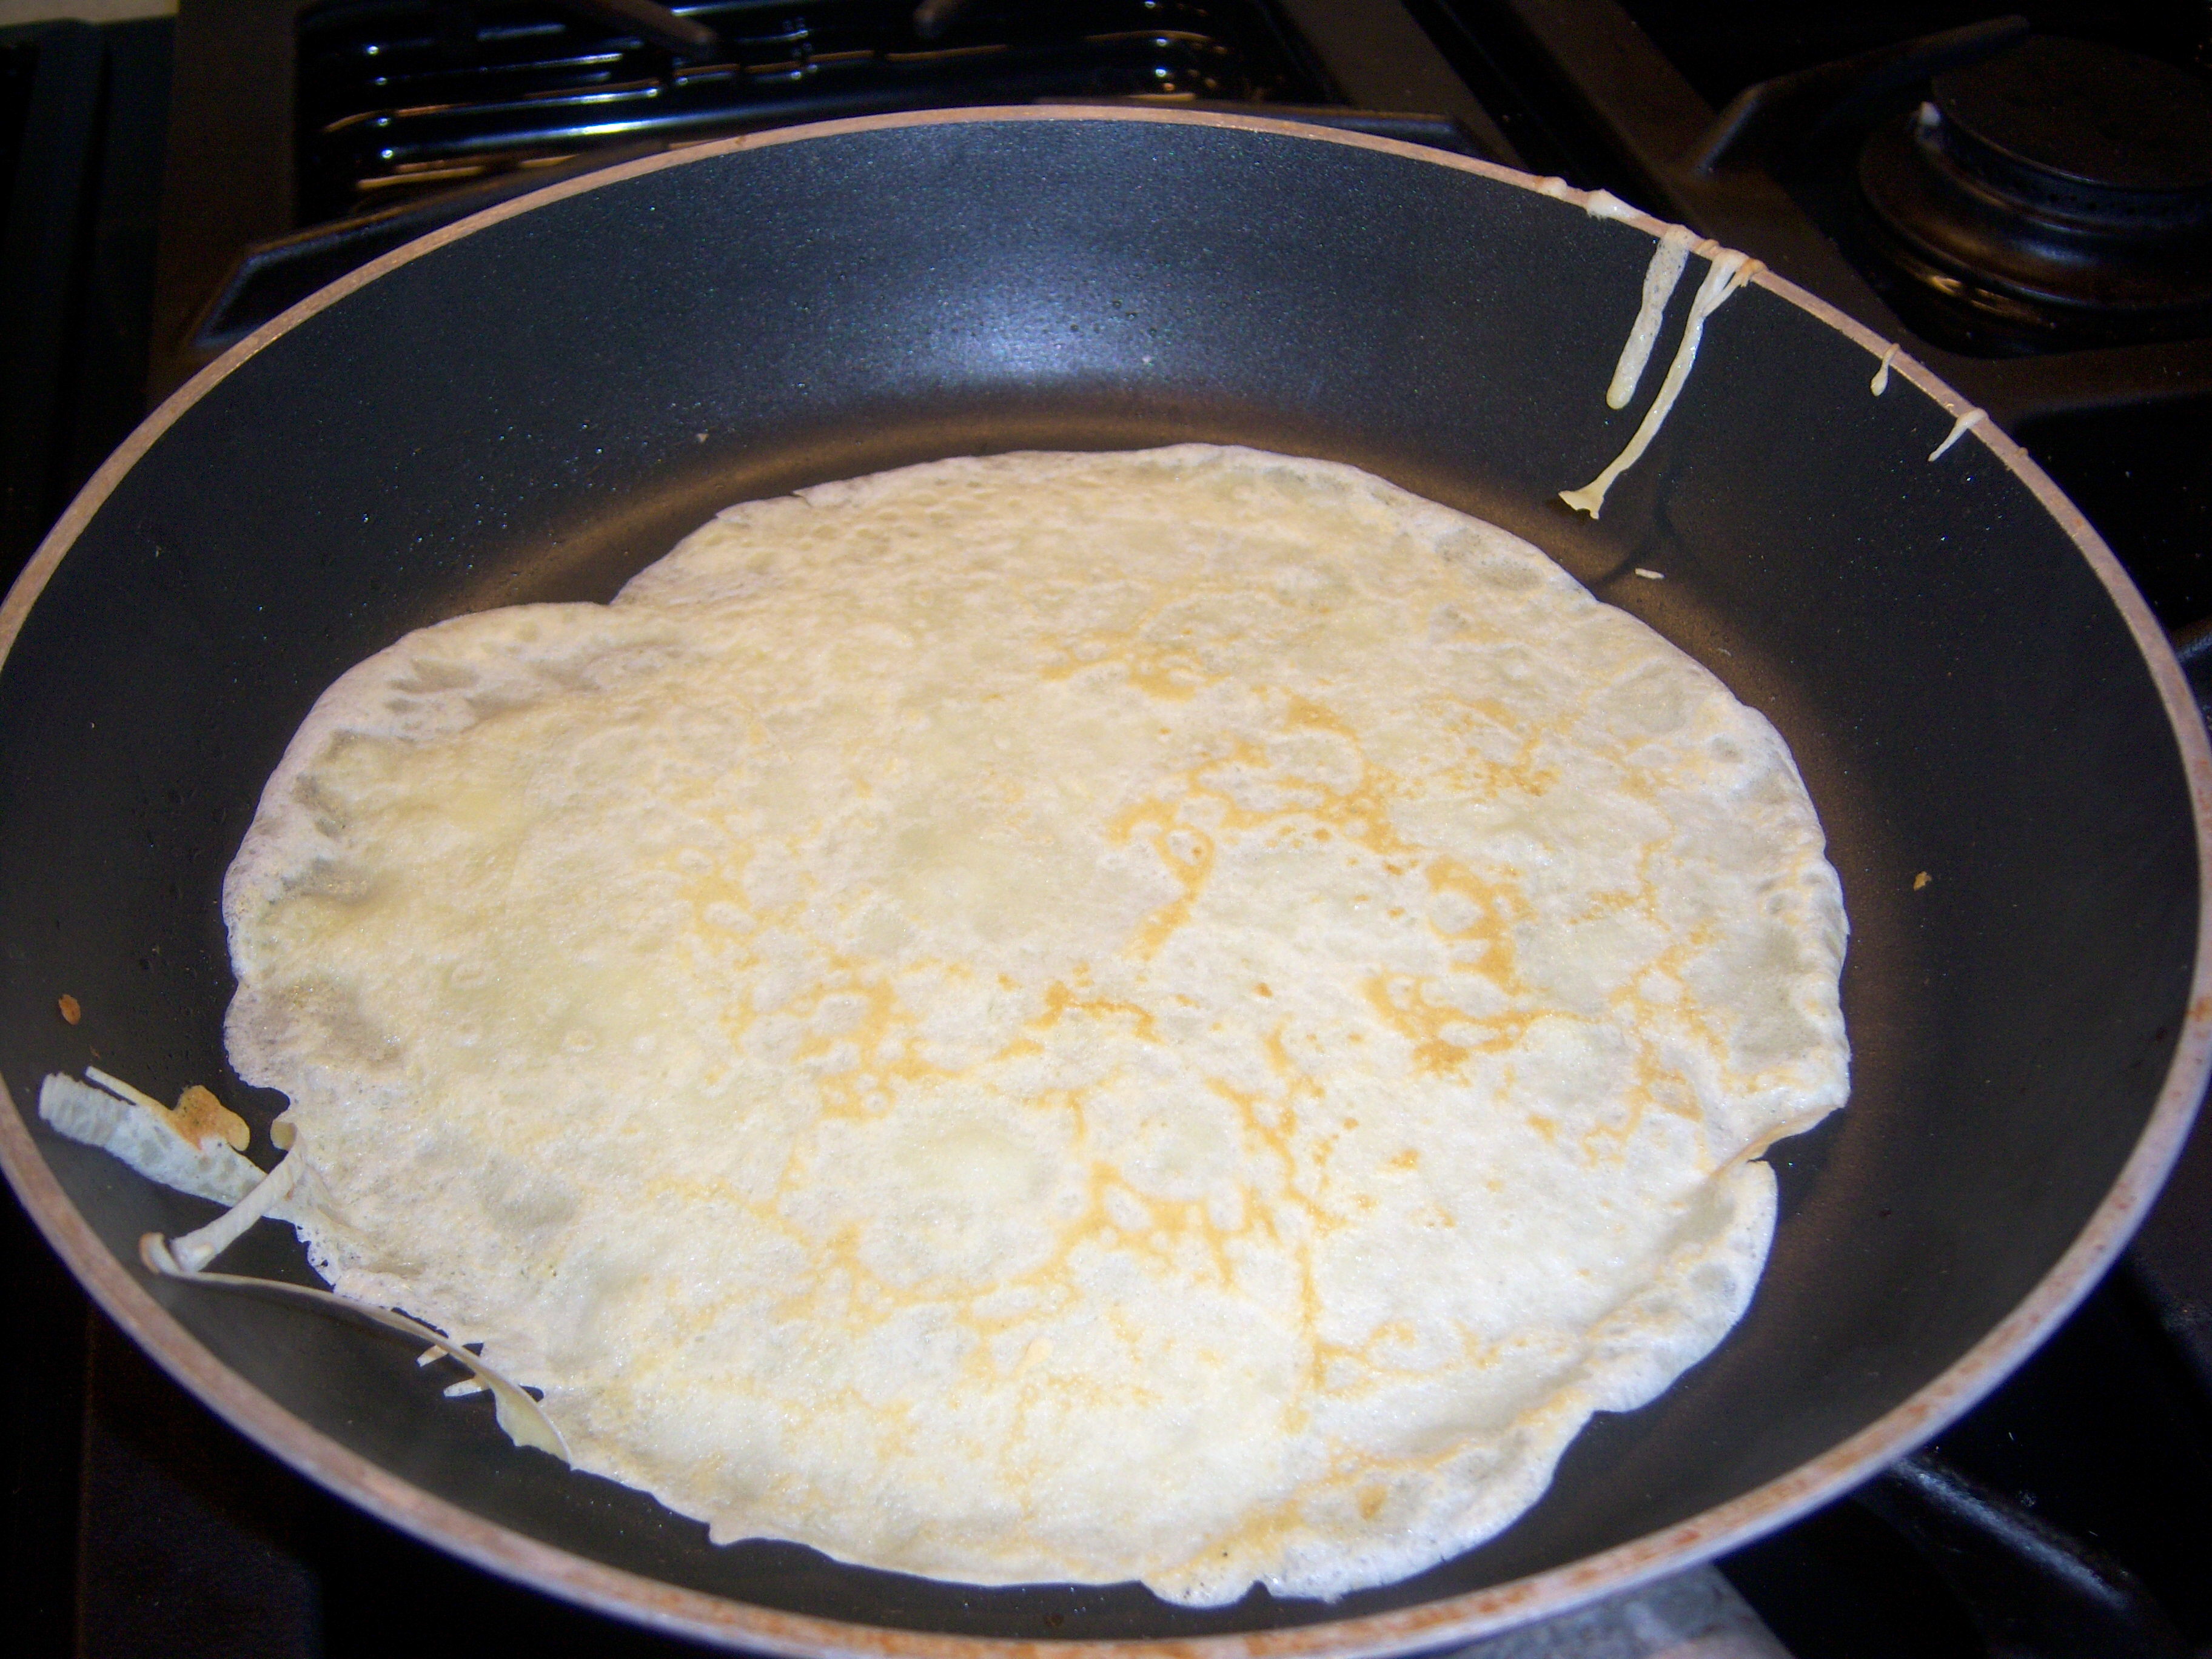 Crepe in the pan